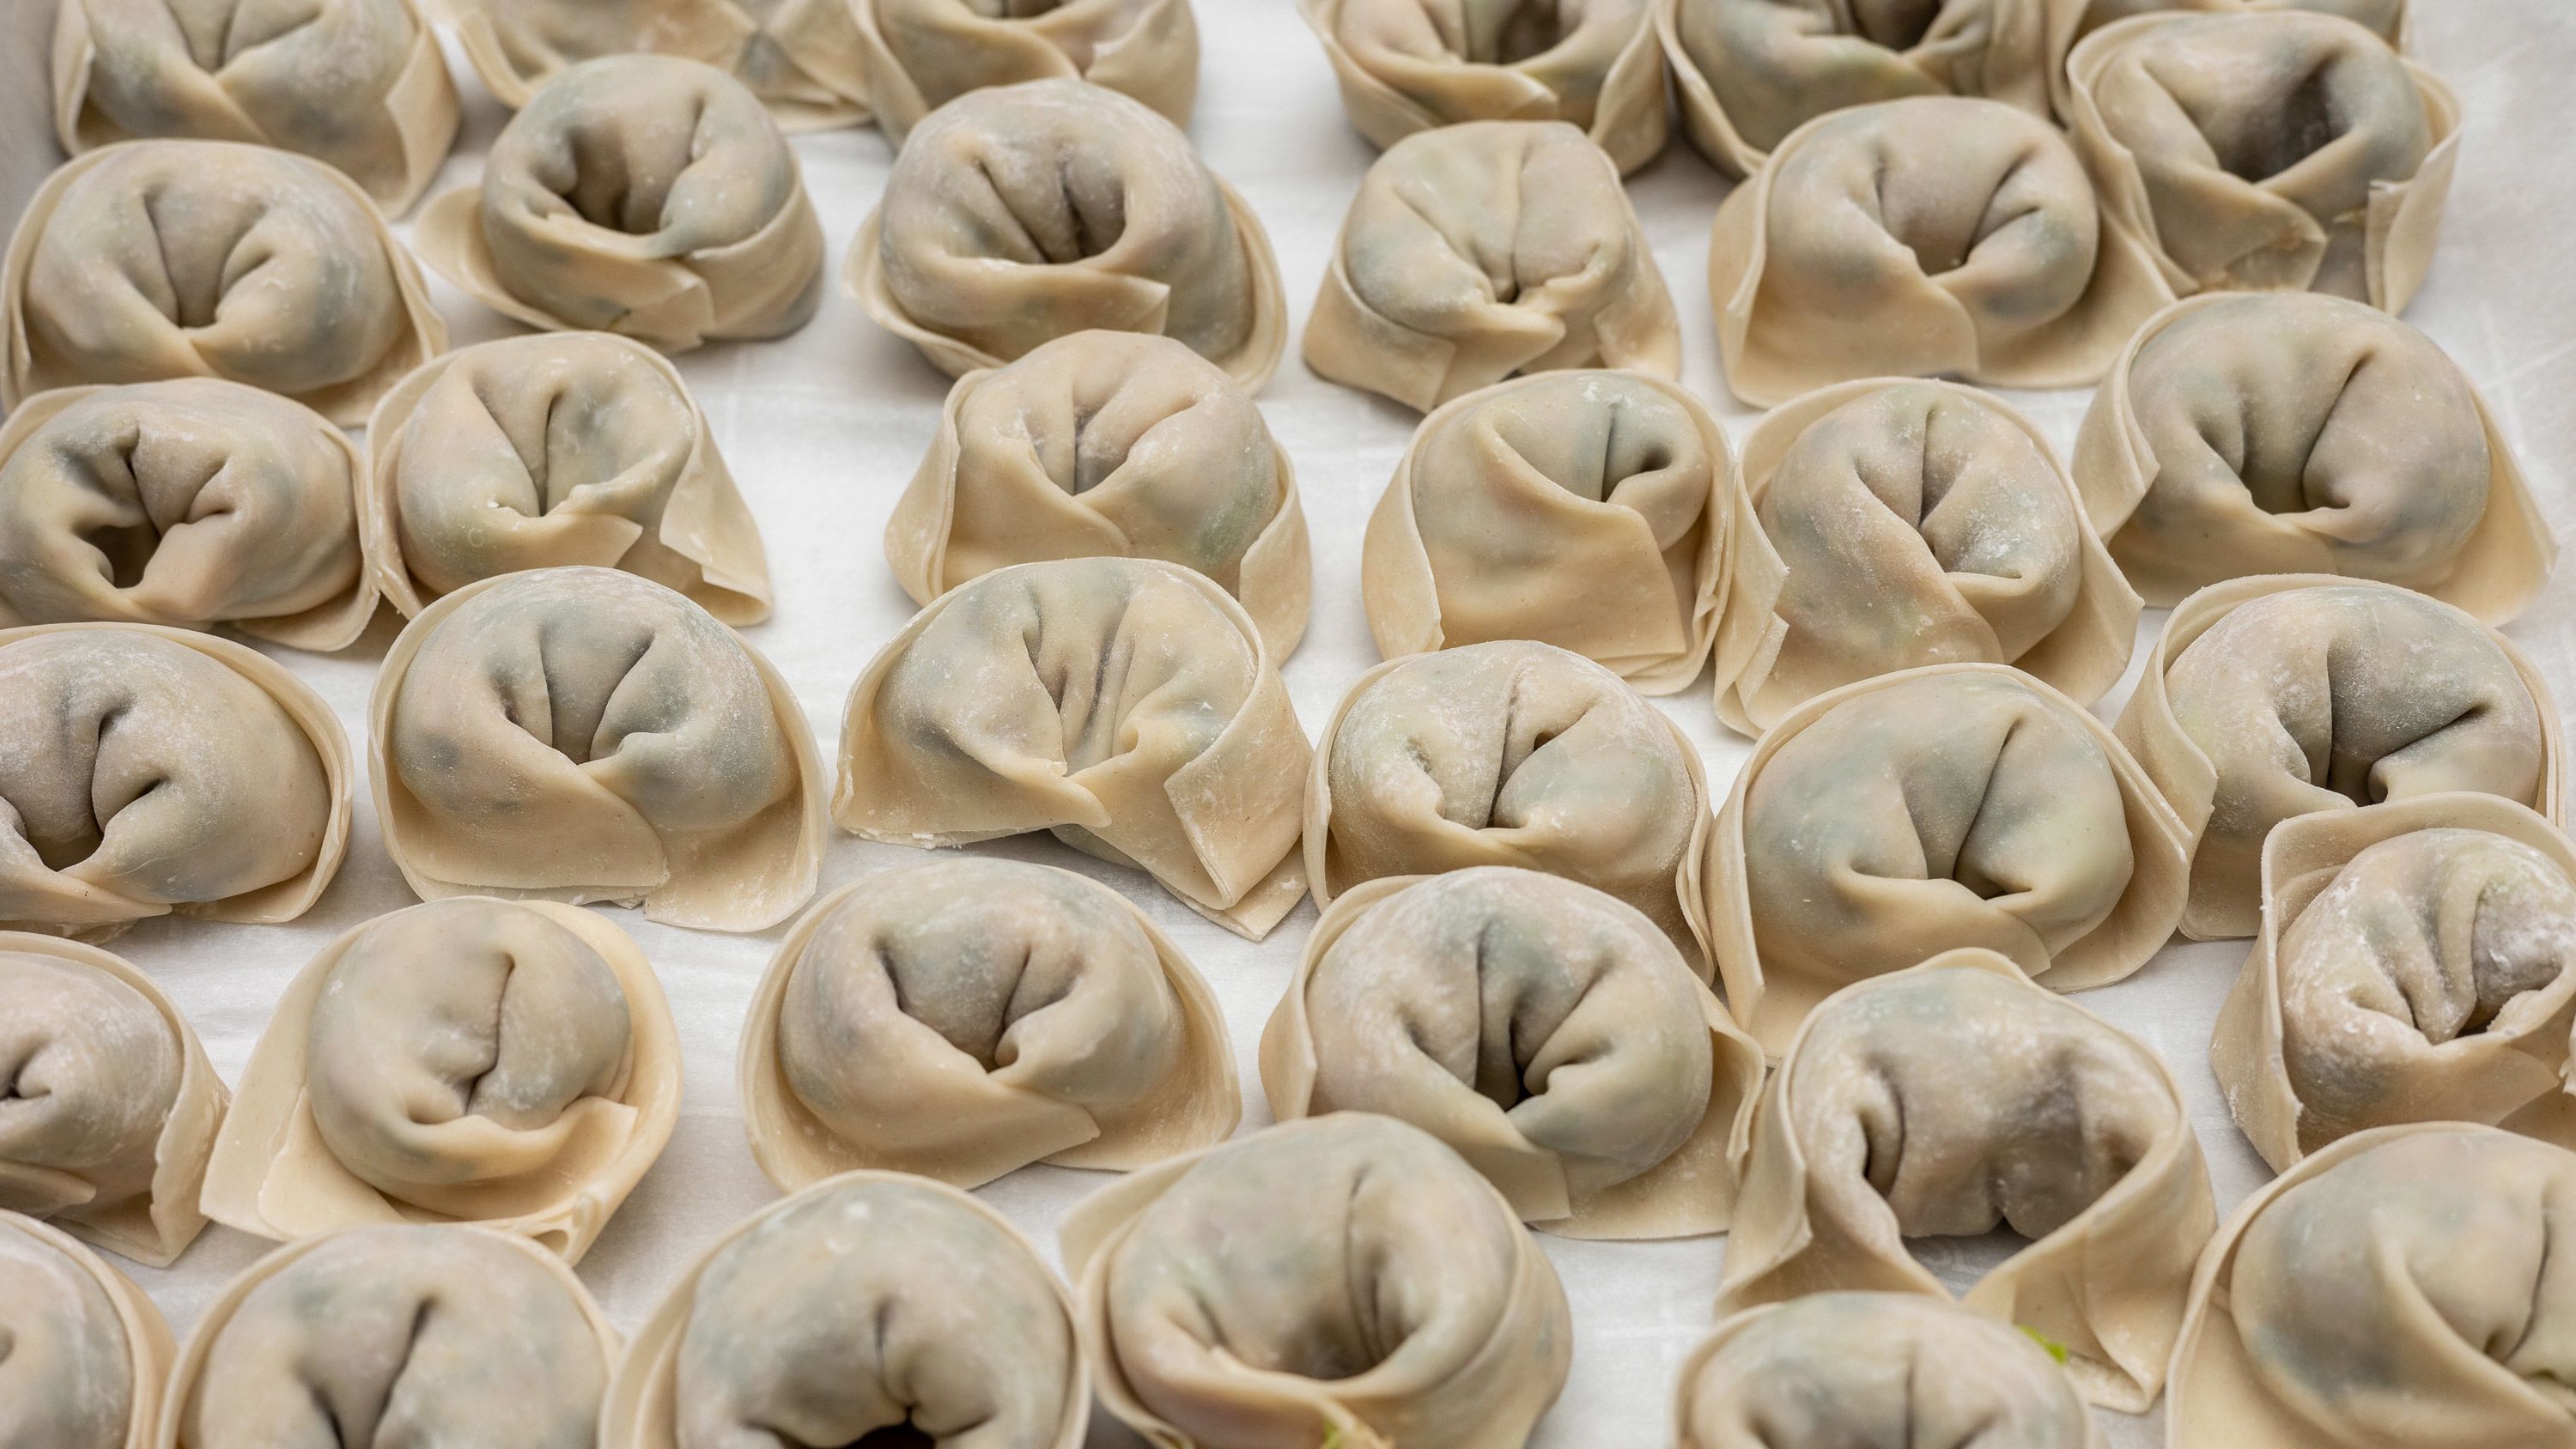 Dumplings around the world. We are all wrapped differently and now